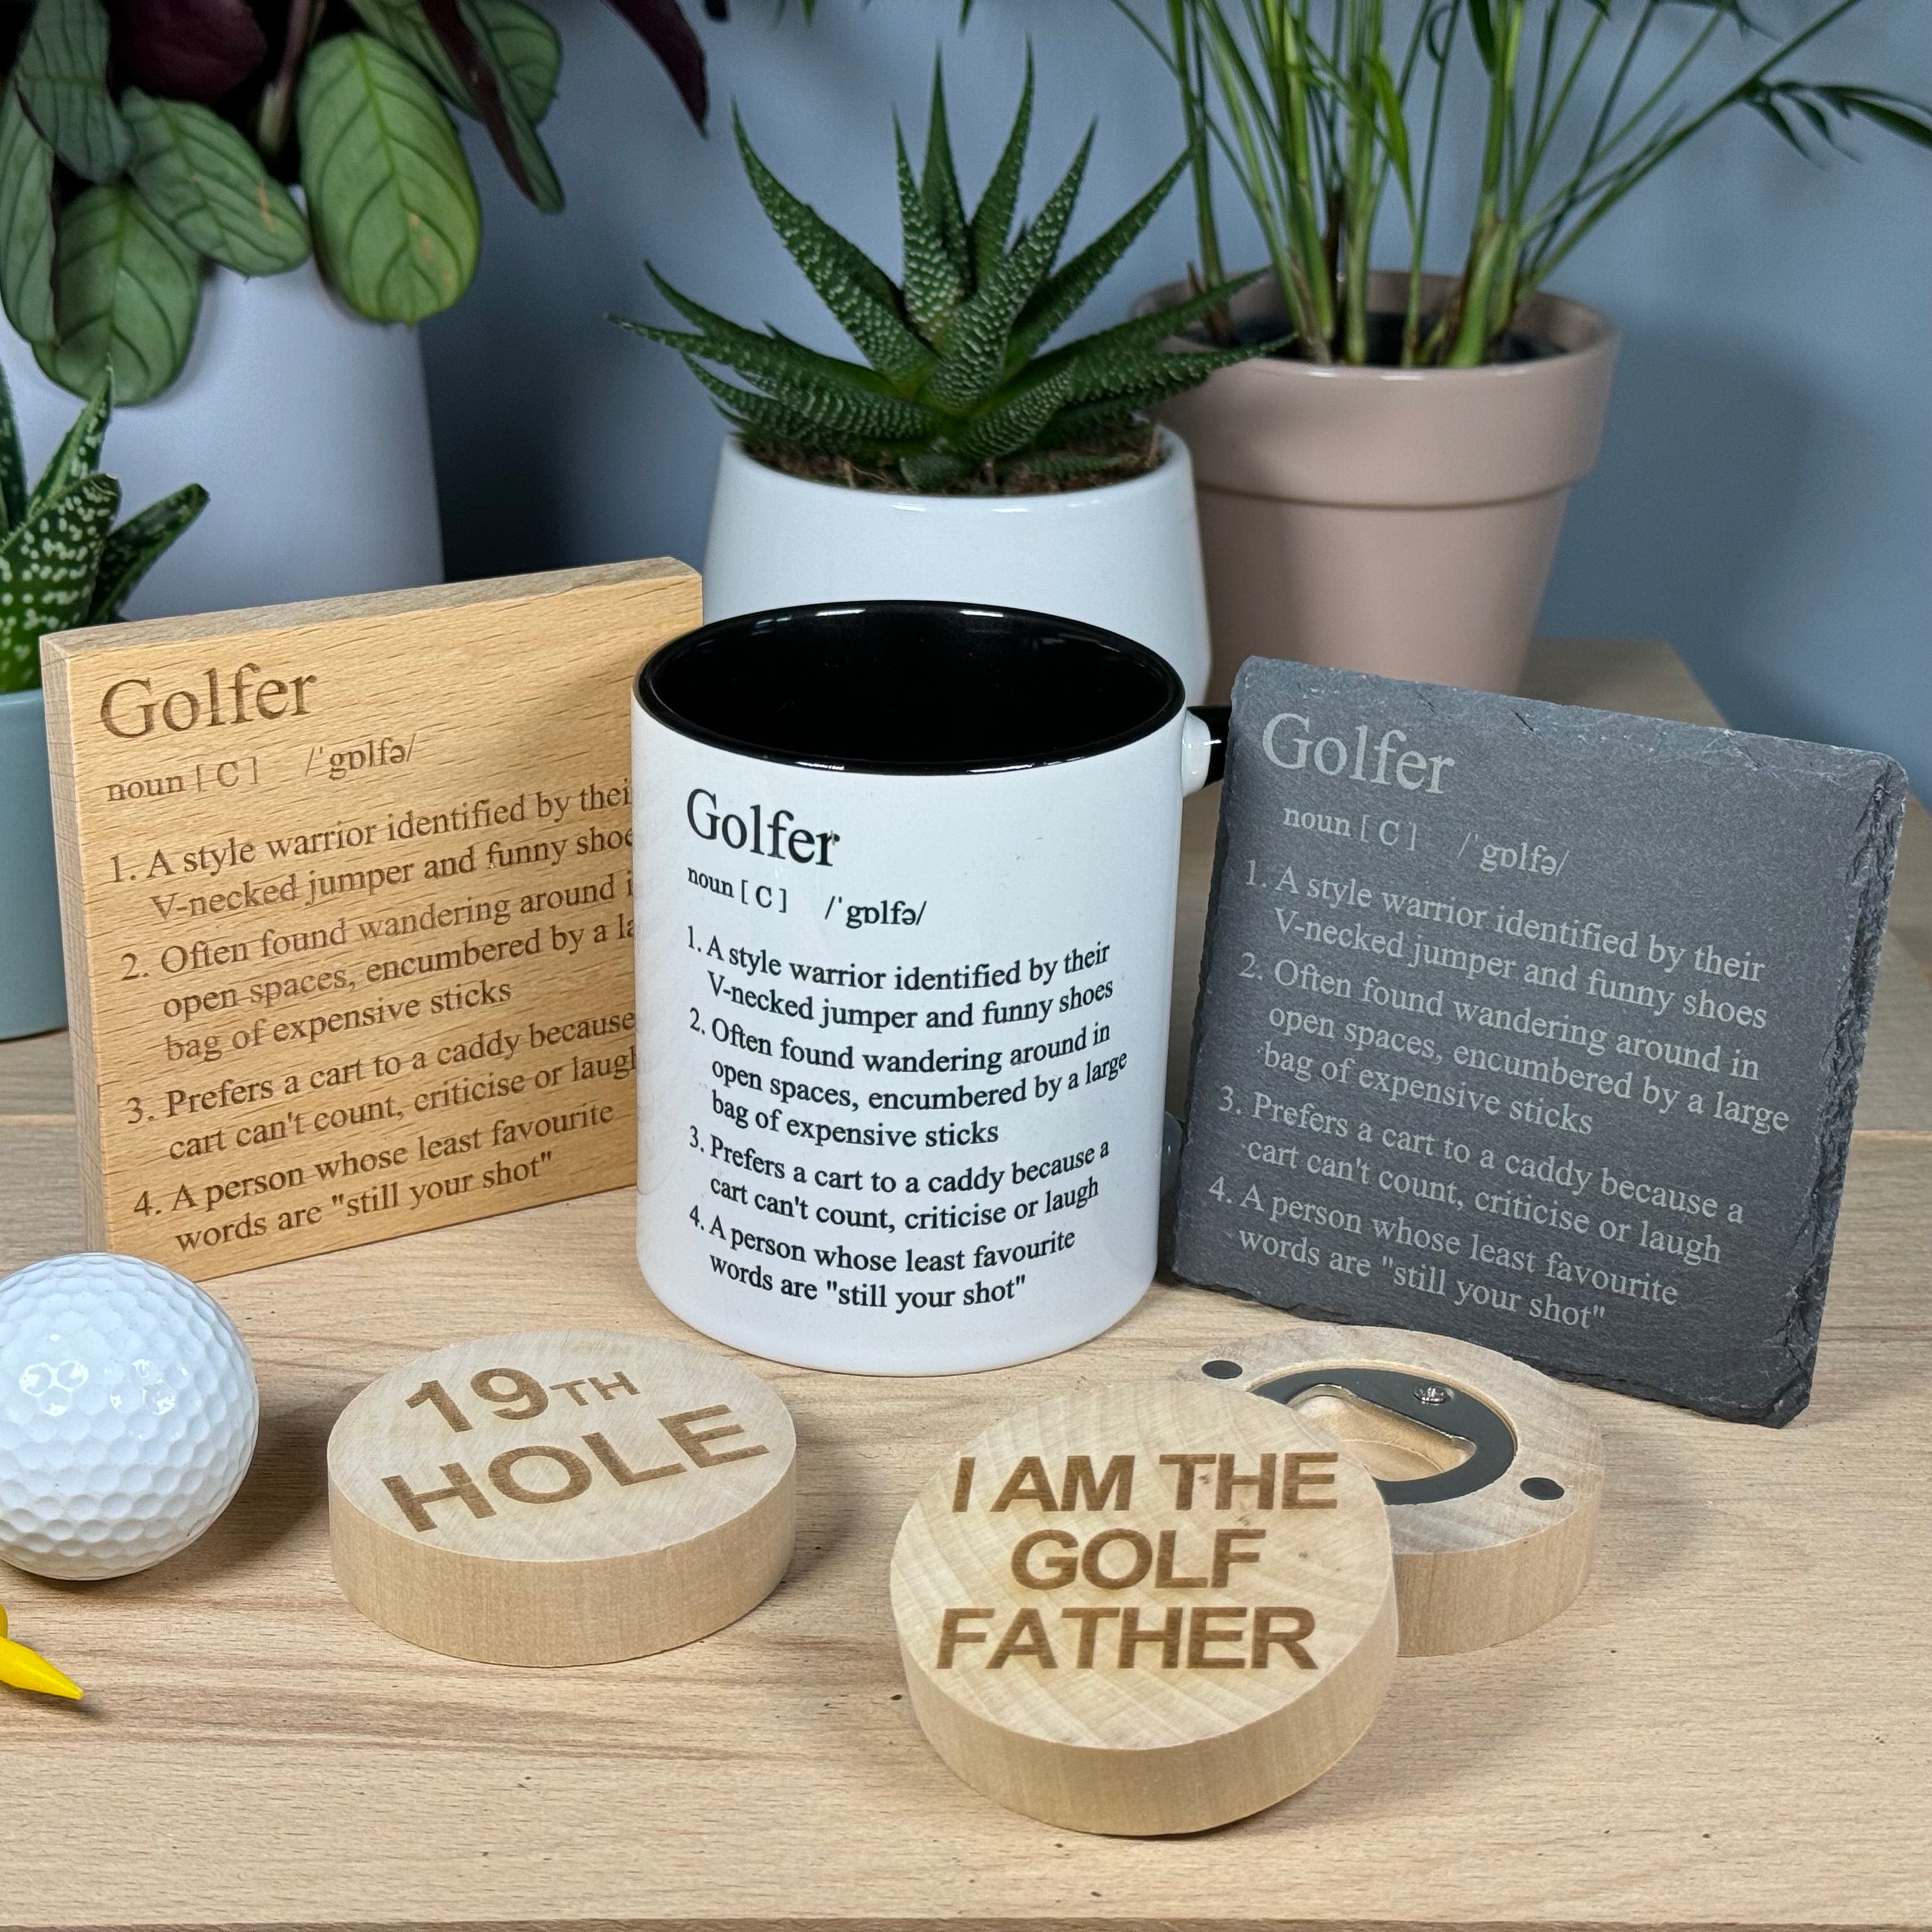 Gifts for golfers collection